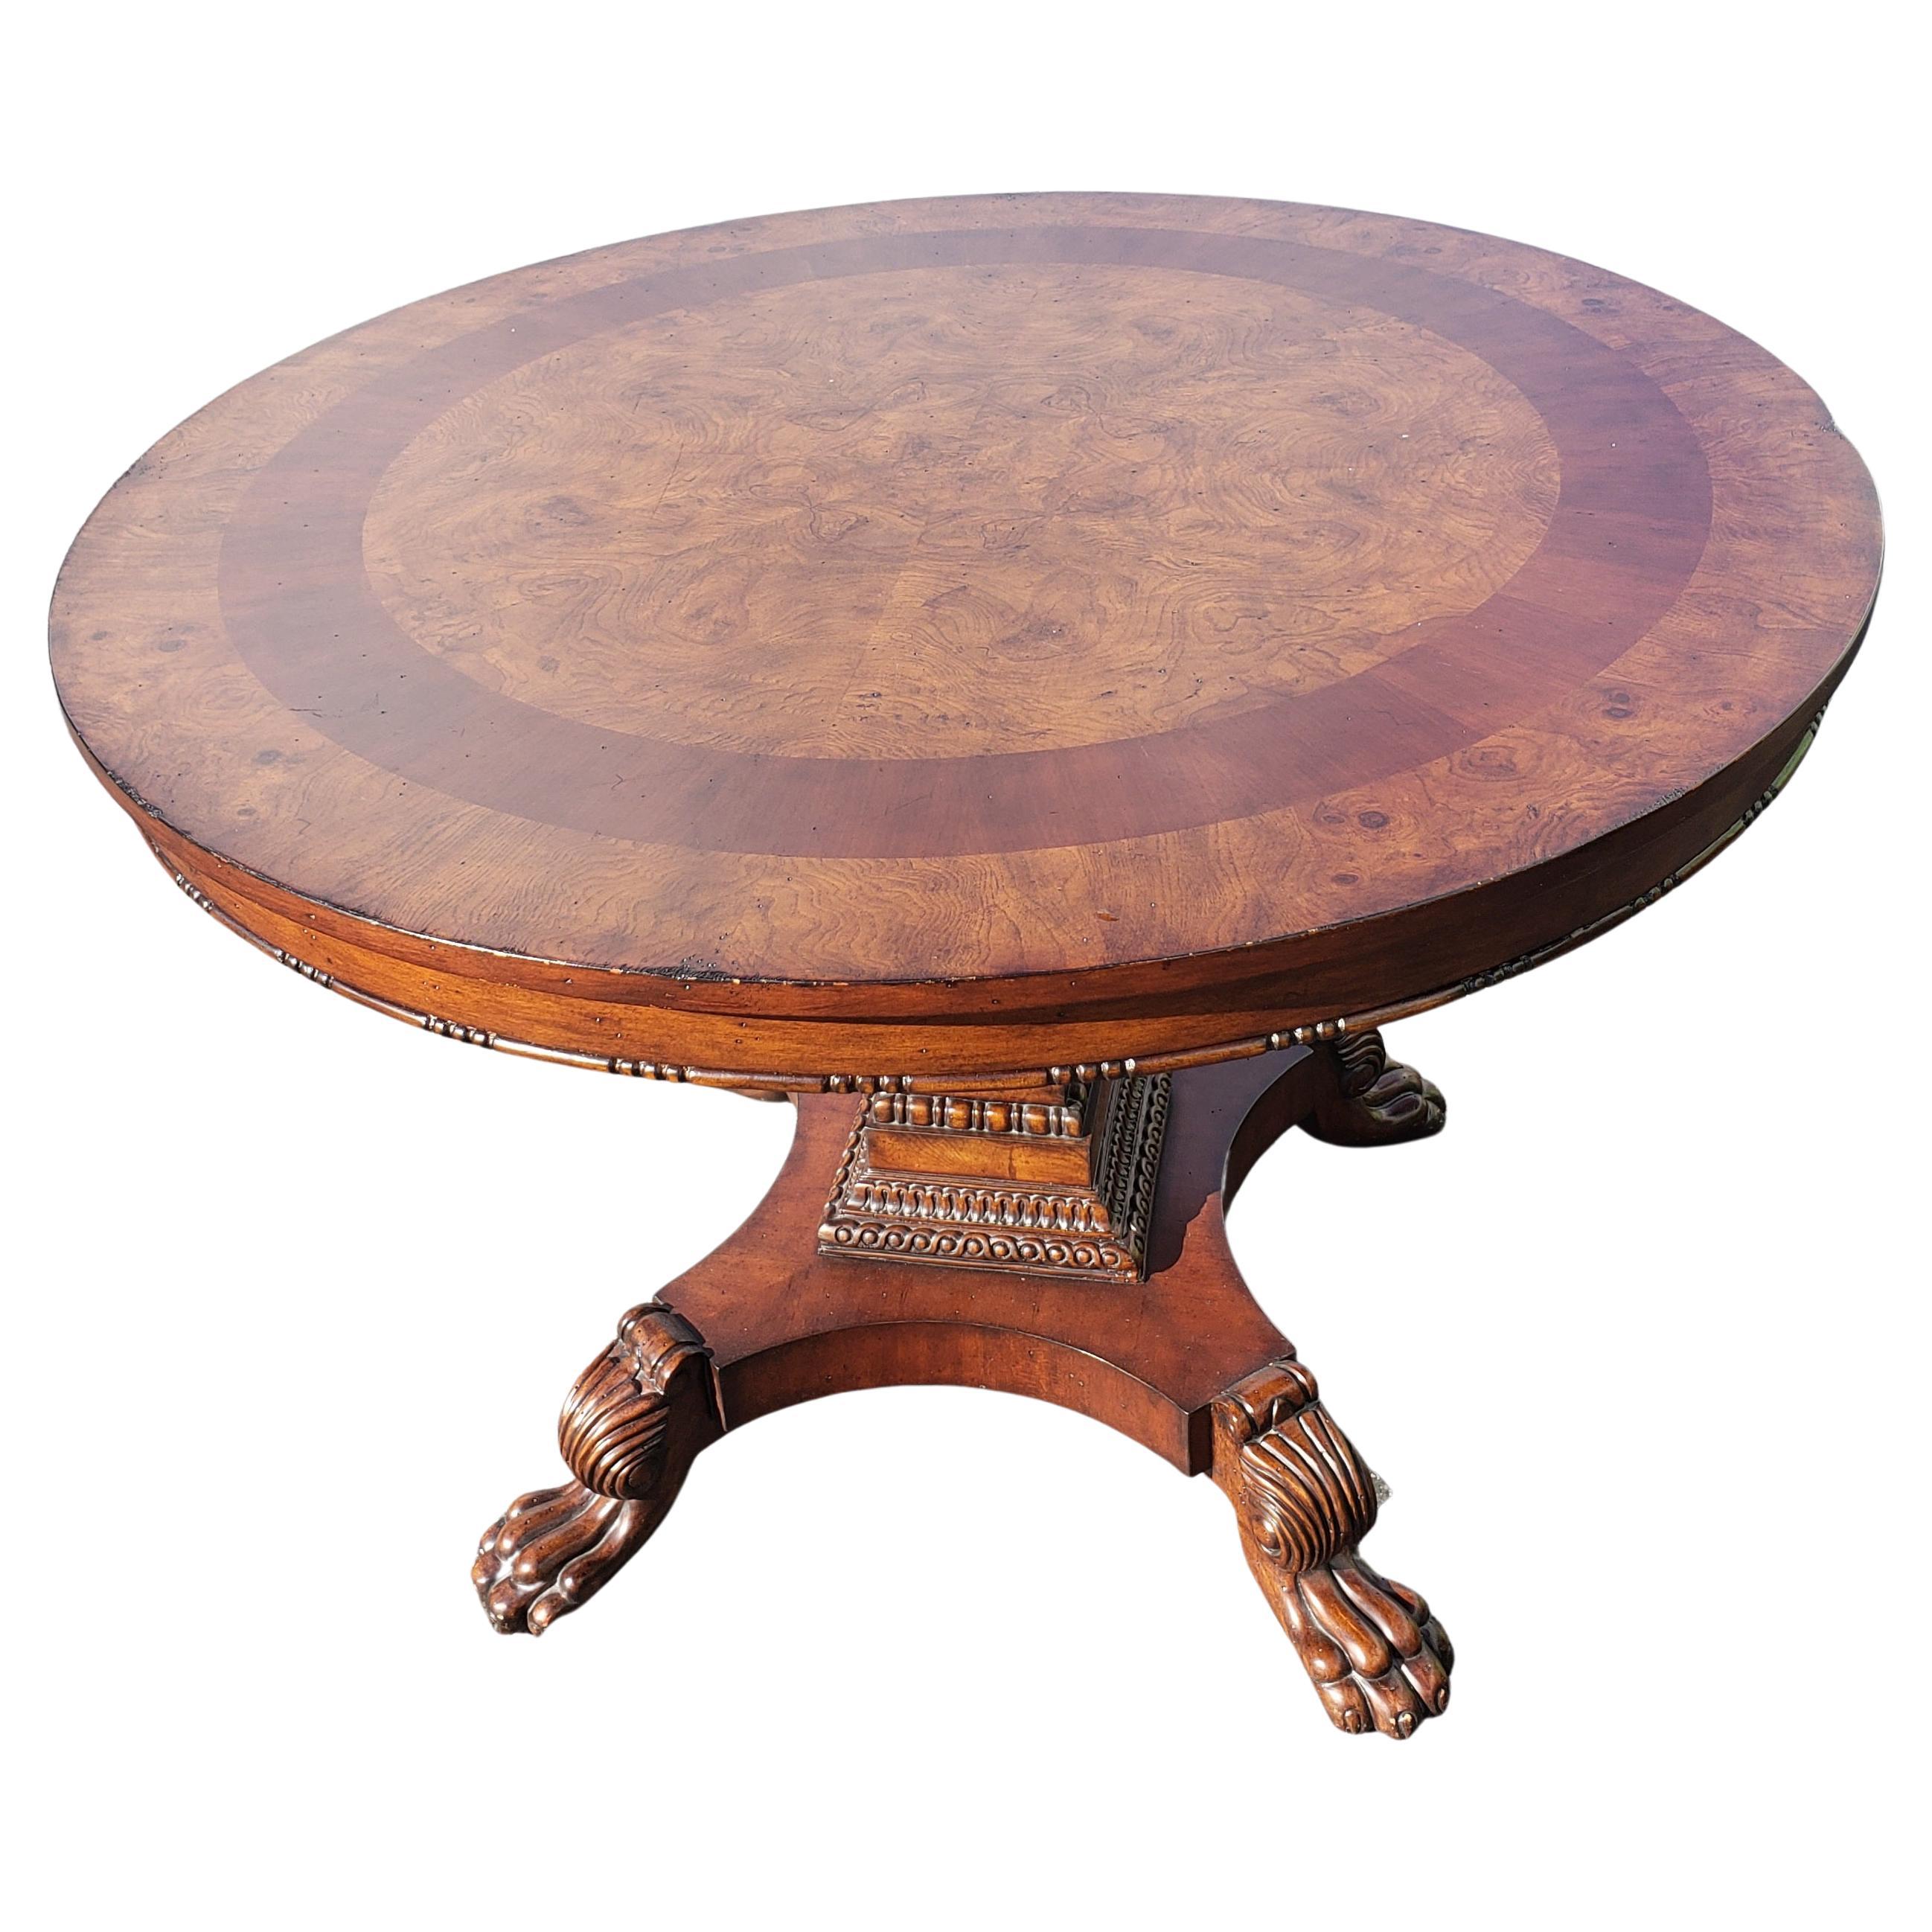 Exquisite book matched burl walnut veneered top with Mahogany banded inlay over a similarly veneered quad part pedestal and stepped base. Pedestal with fine carving details ending with large lion paw feet. Manufacturer's distressed top and pedestal.